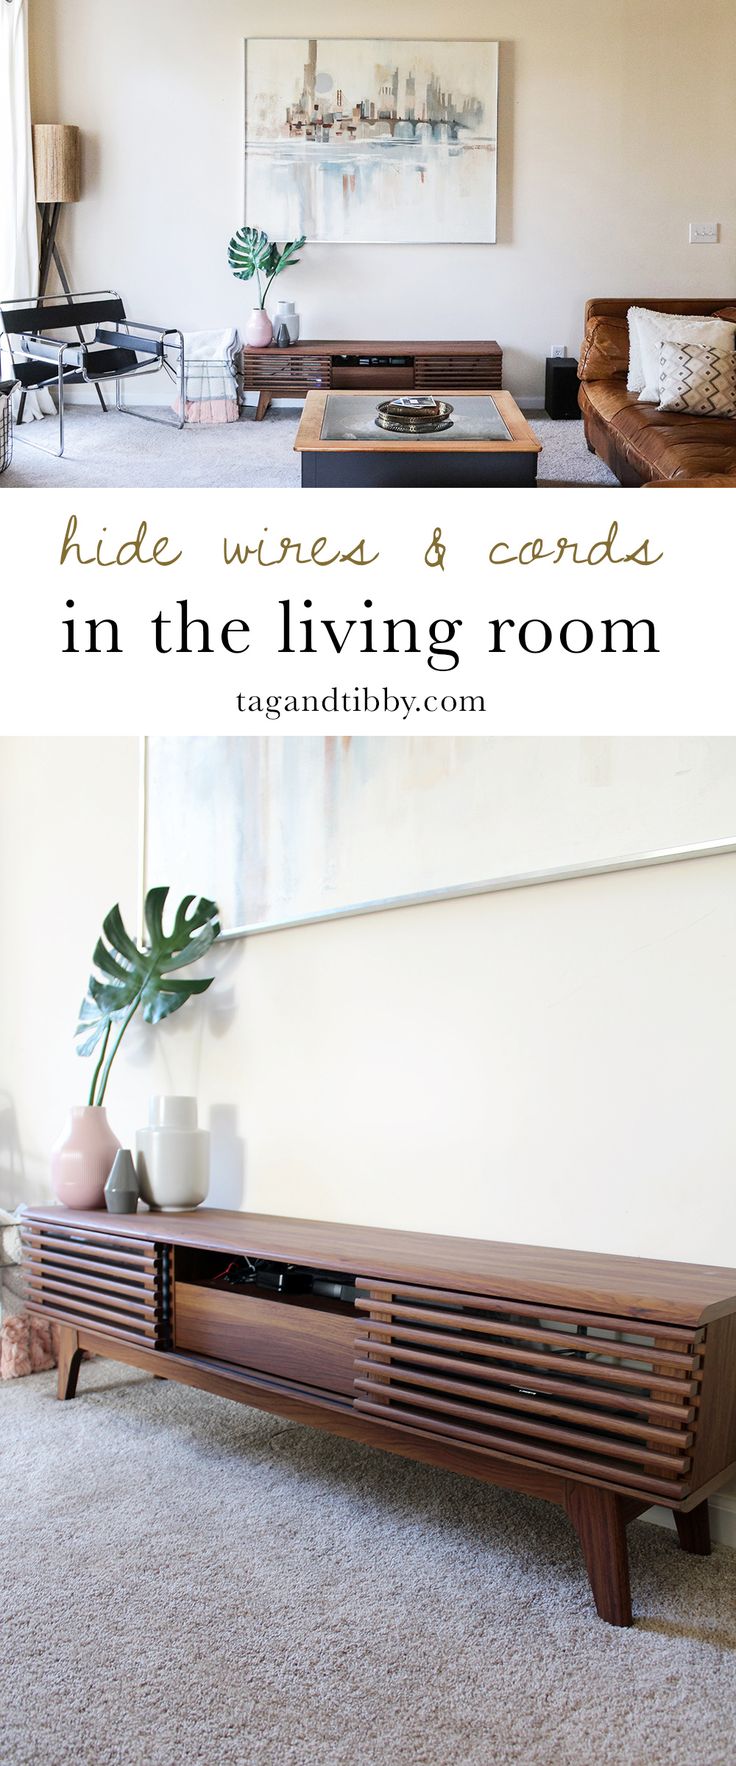 One Way to Hide Wires in a Living Room